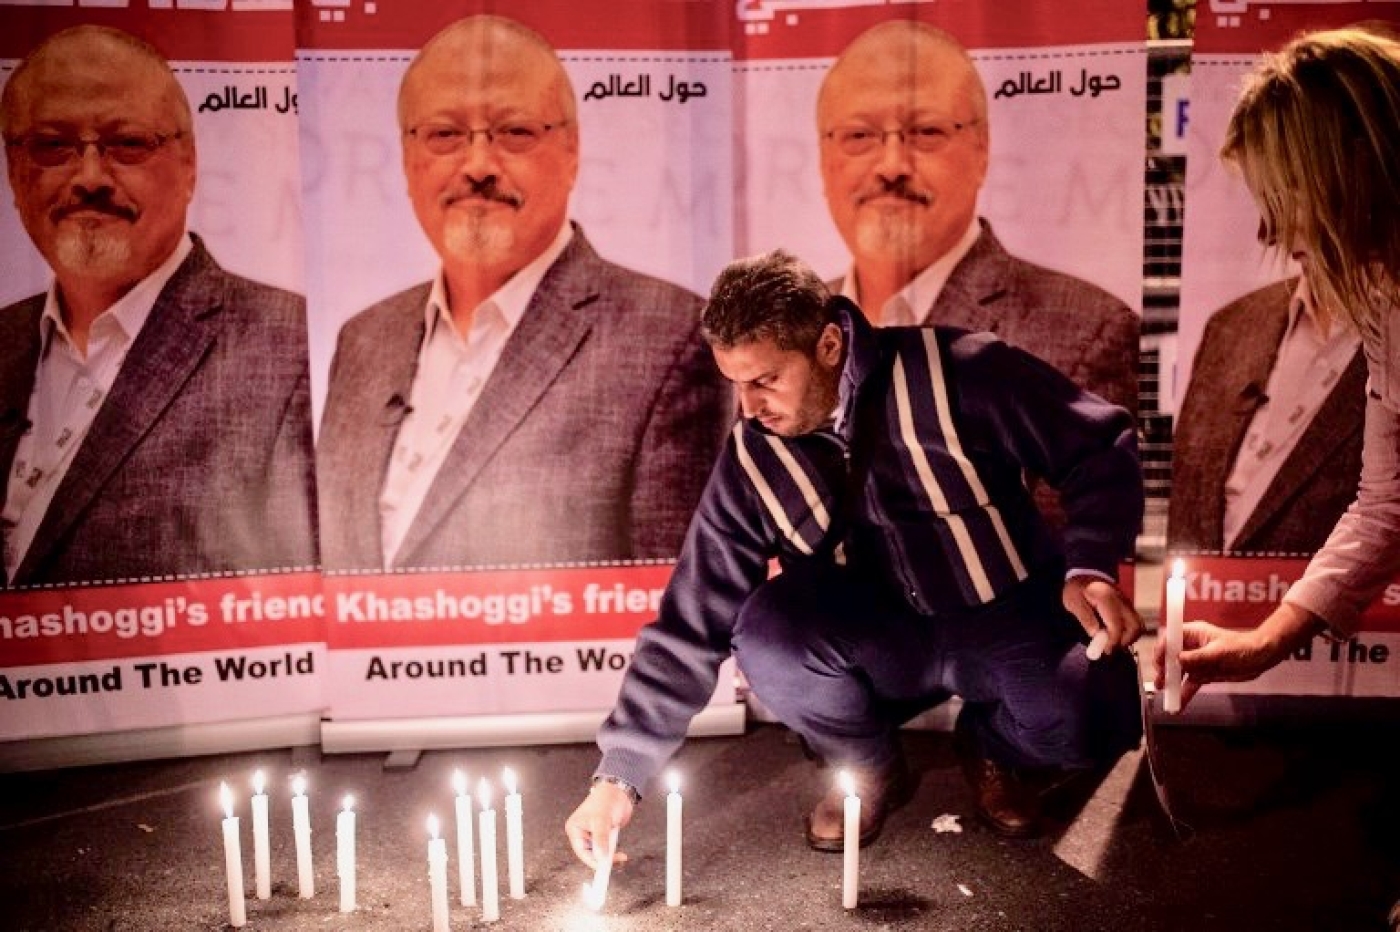 Saudi journalist and US resident Jamal Khashoggi was murdered by Saudi government agents in Istanbul 